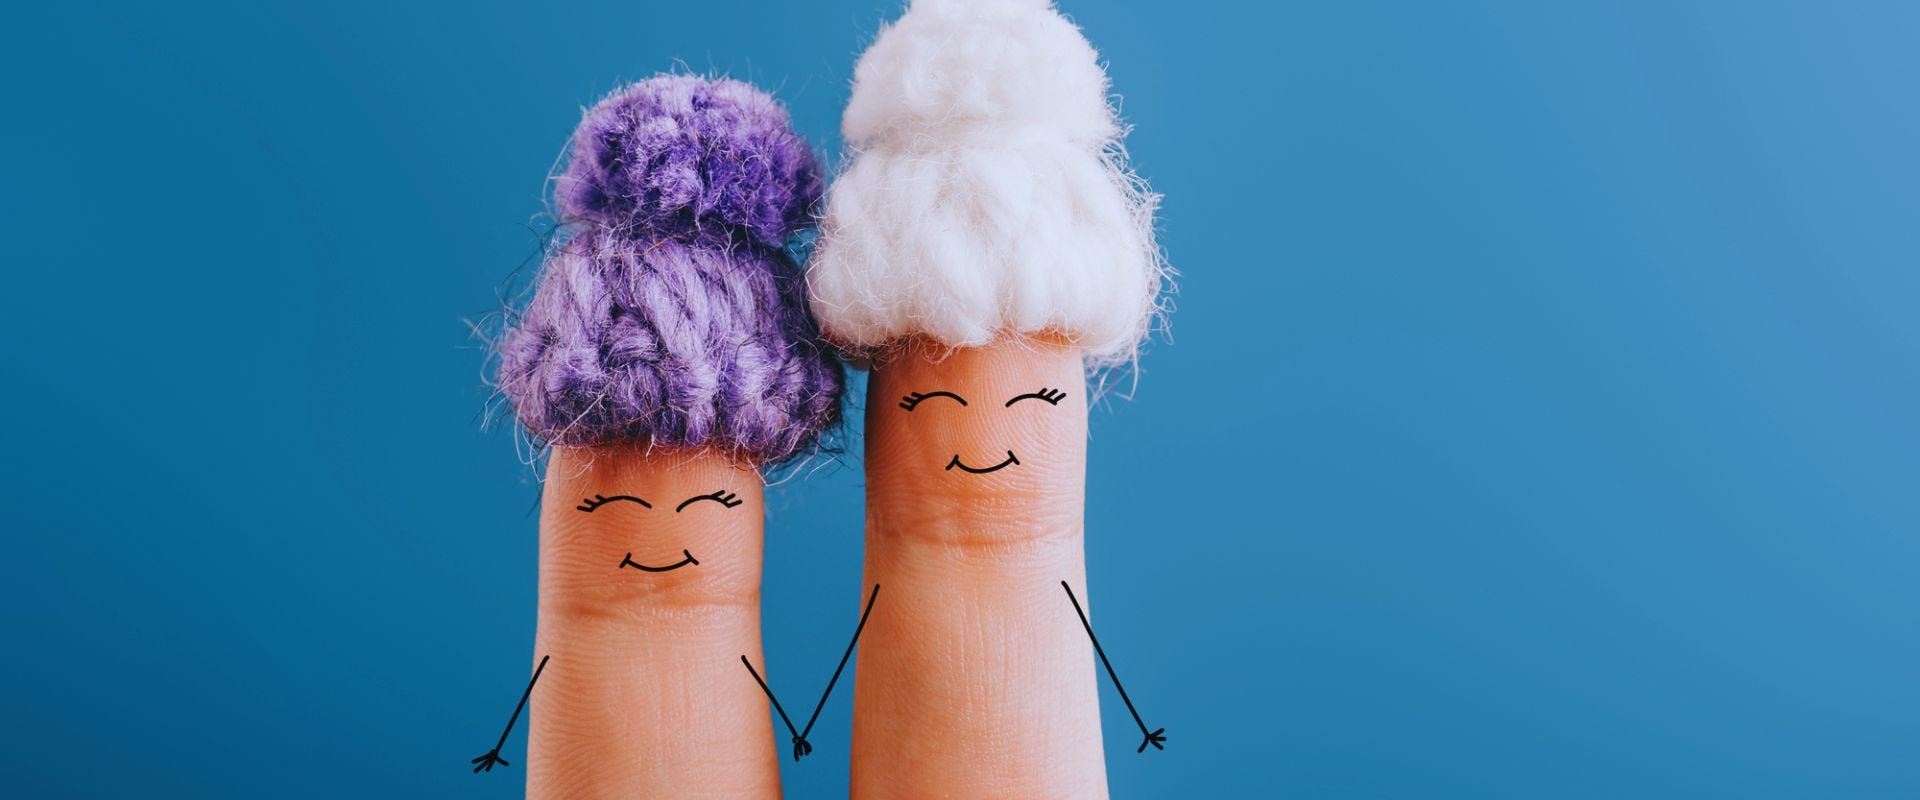 image of two fingers with smiling faces wearing knit hats